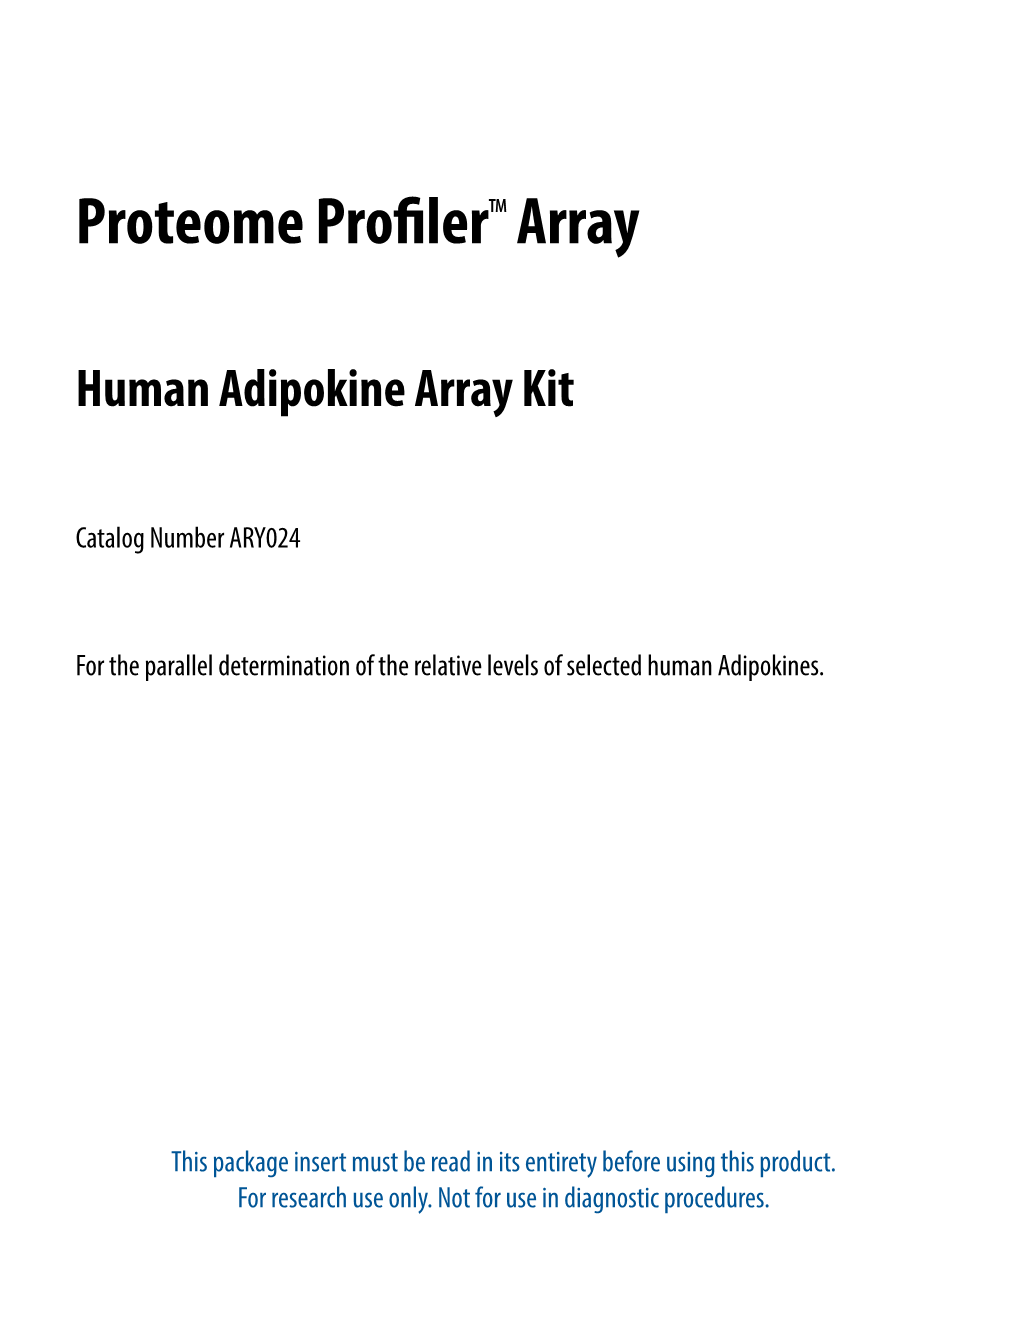 Proteome Profiler Human Adipokine Array Is a Rapid, Sensitive, and Economical Tool to Detect Differences in Adipokines Between Samples